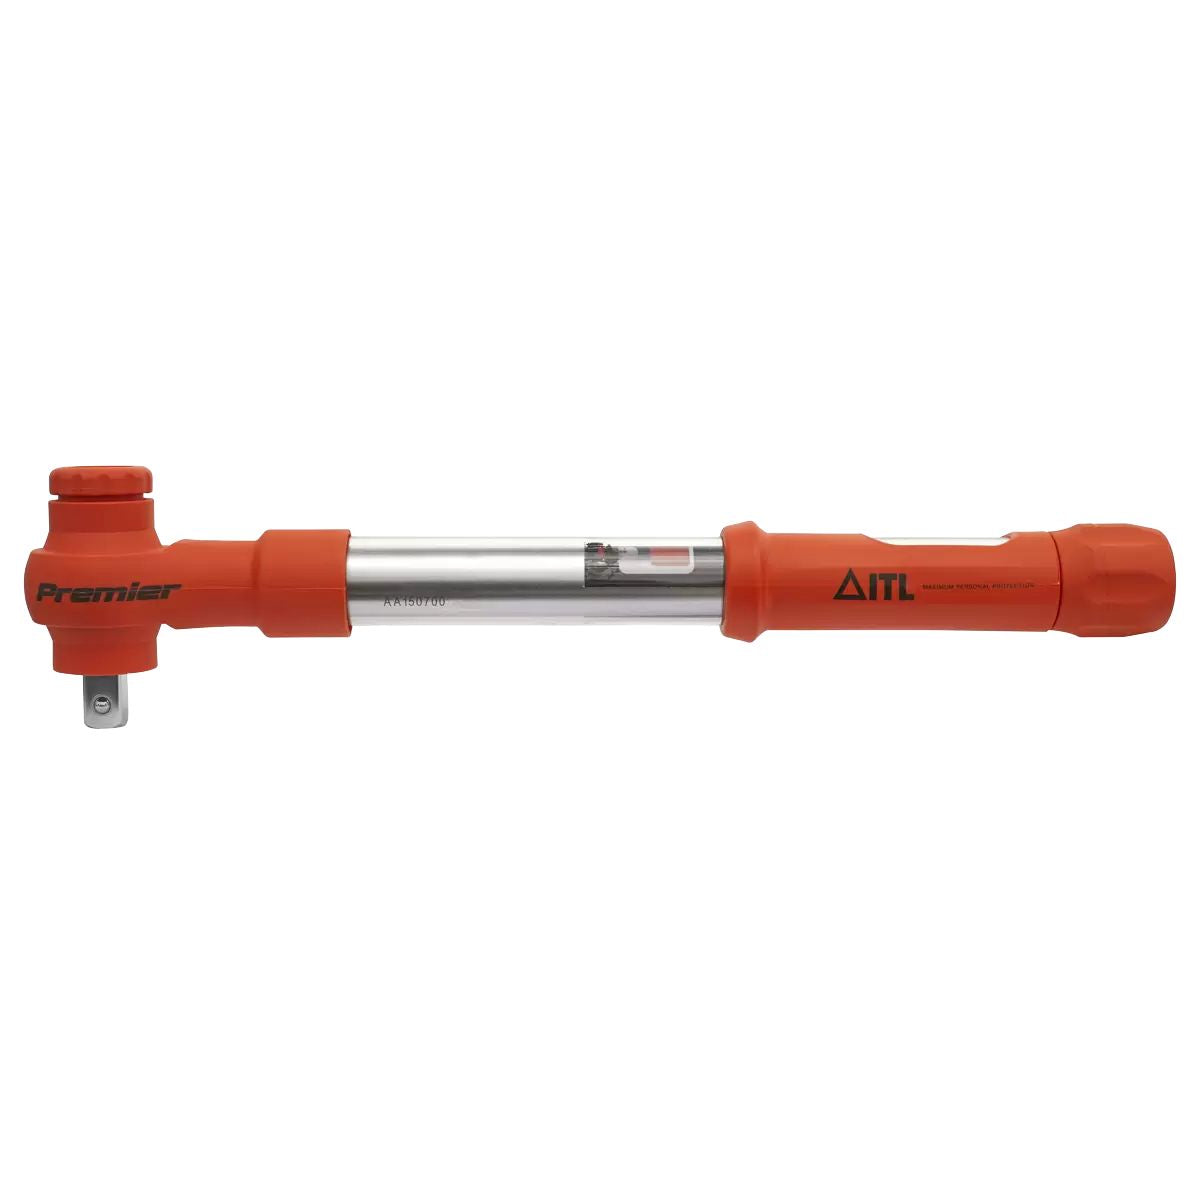 Sealey STW807 Torque Wrench Insulated 1/2